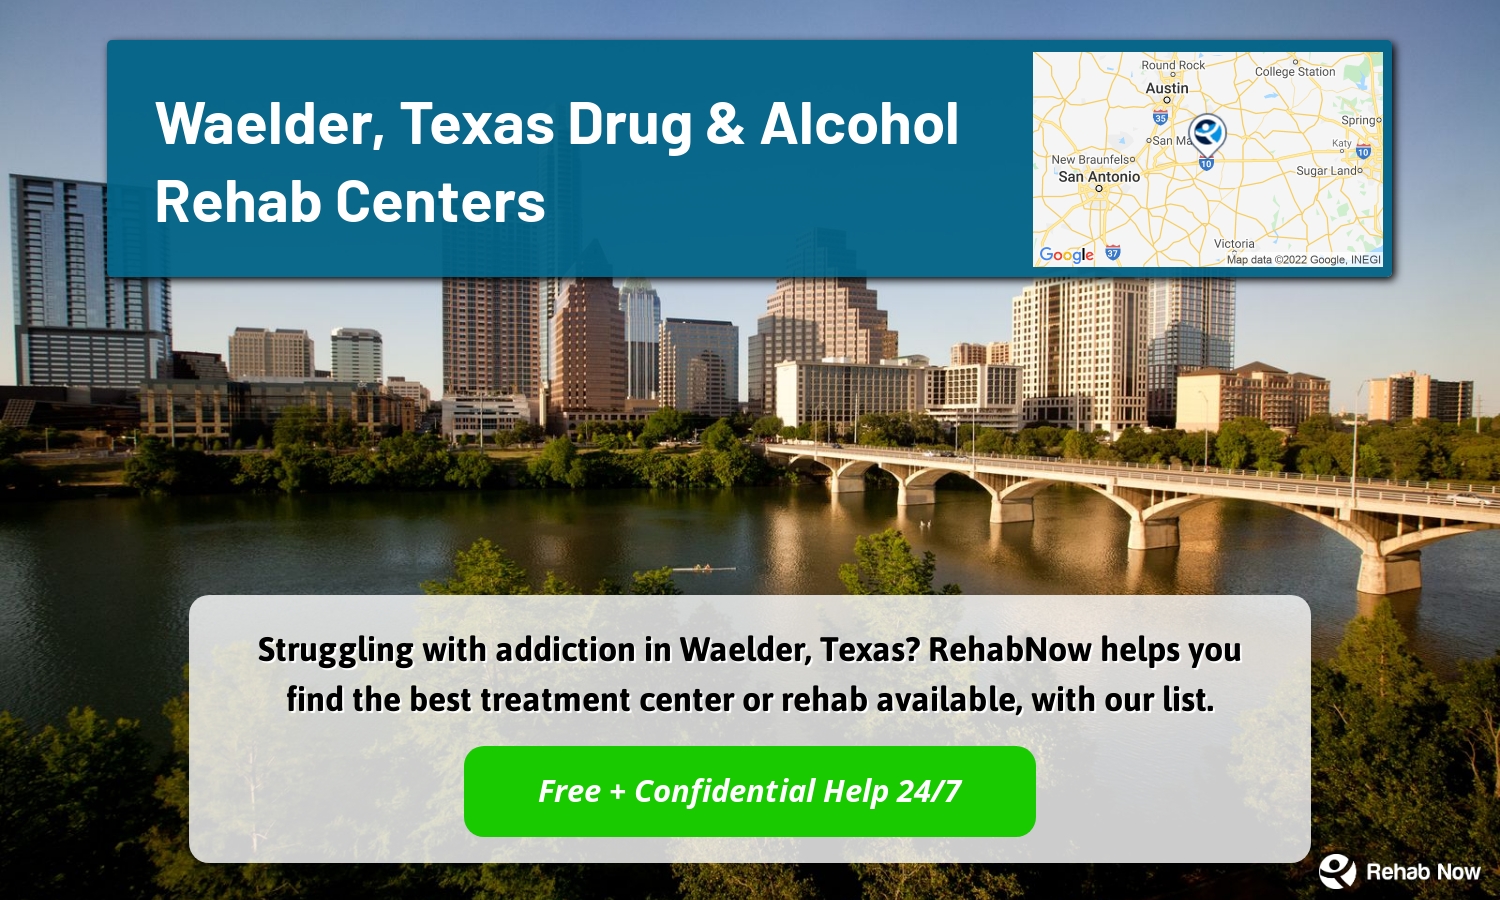 Struggling with addiction in Waelder, Texas? RehabNow helps you find the best treatment center or rehab available, with our list.